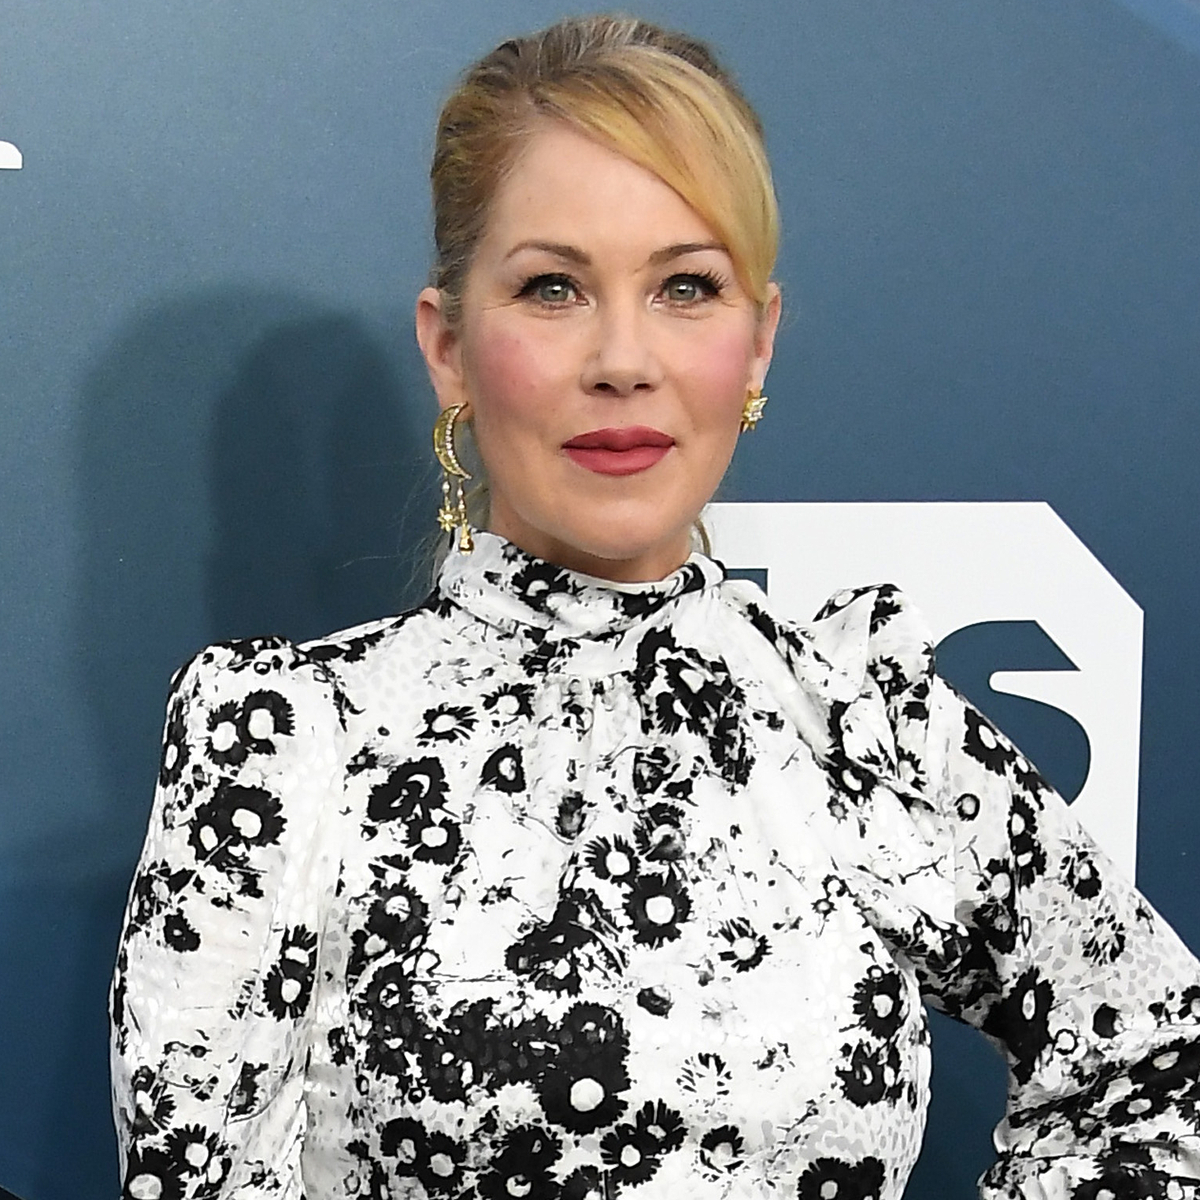 Image for article Christina Applegate Suffering From Gross Sapovirus Symptoms After Unknowingly Ingesting Poop  E! Online  E! NEWS